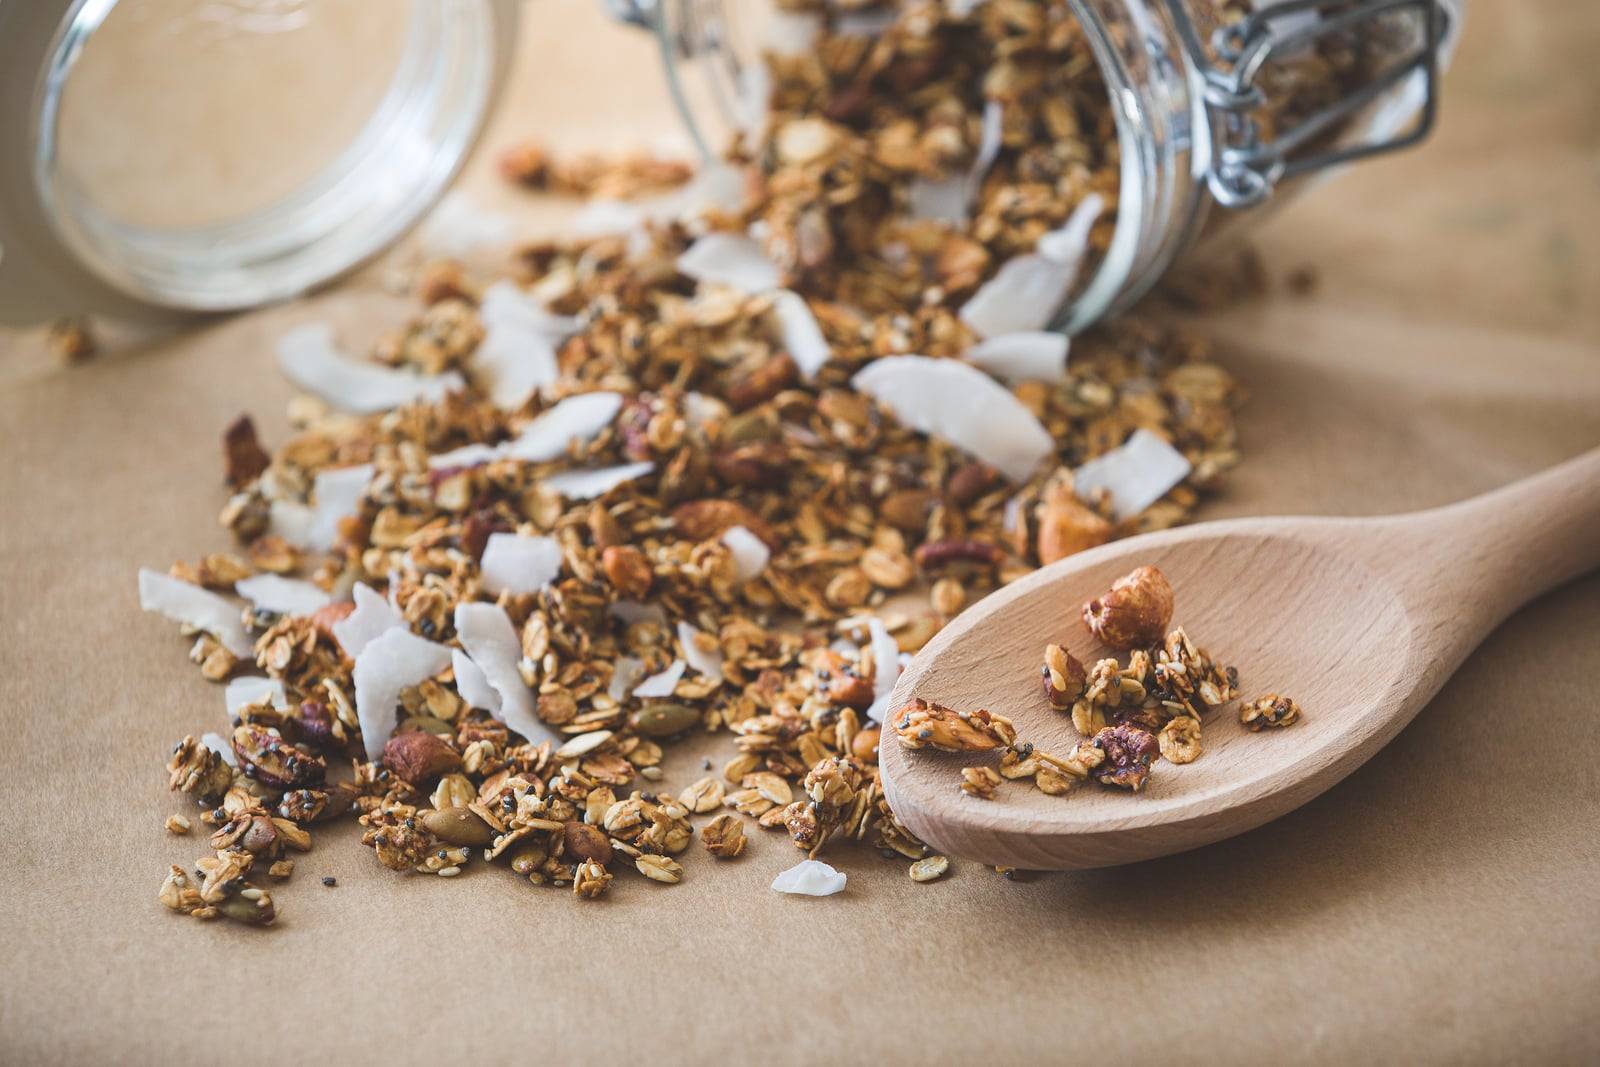 How to Make Healthy Granola?